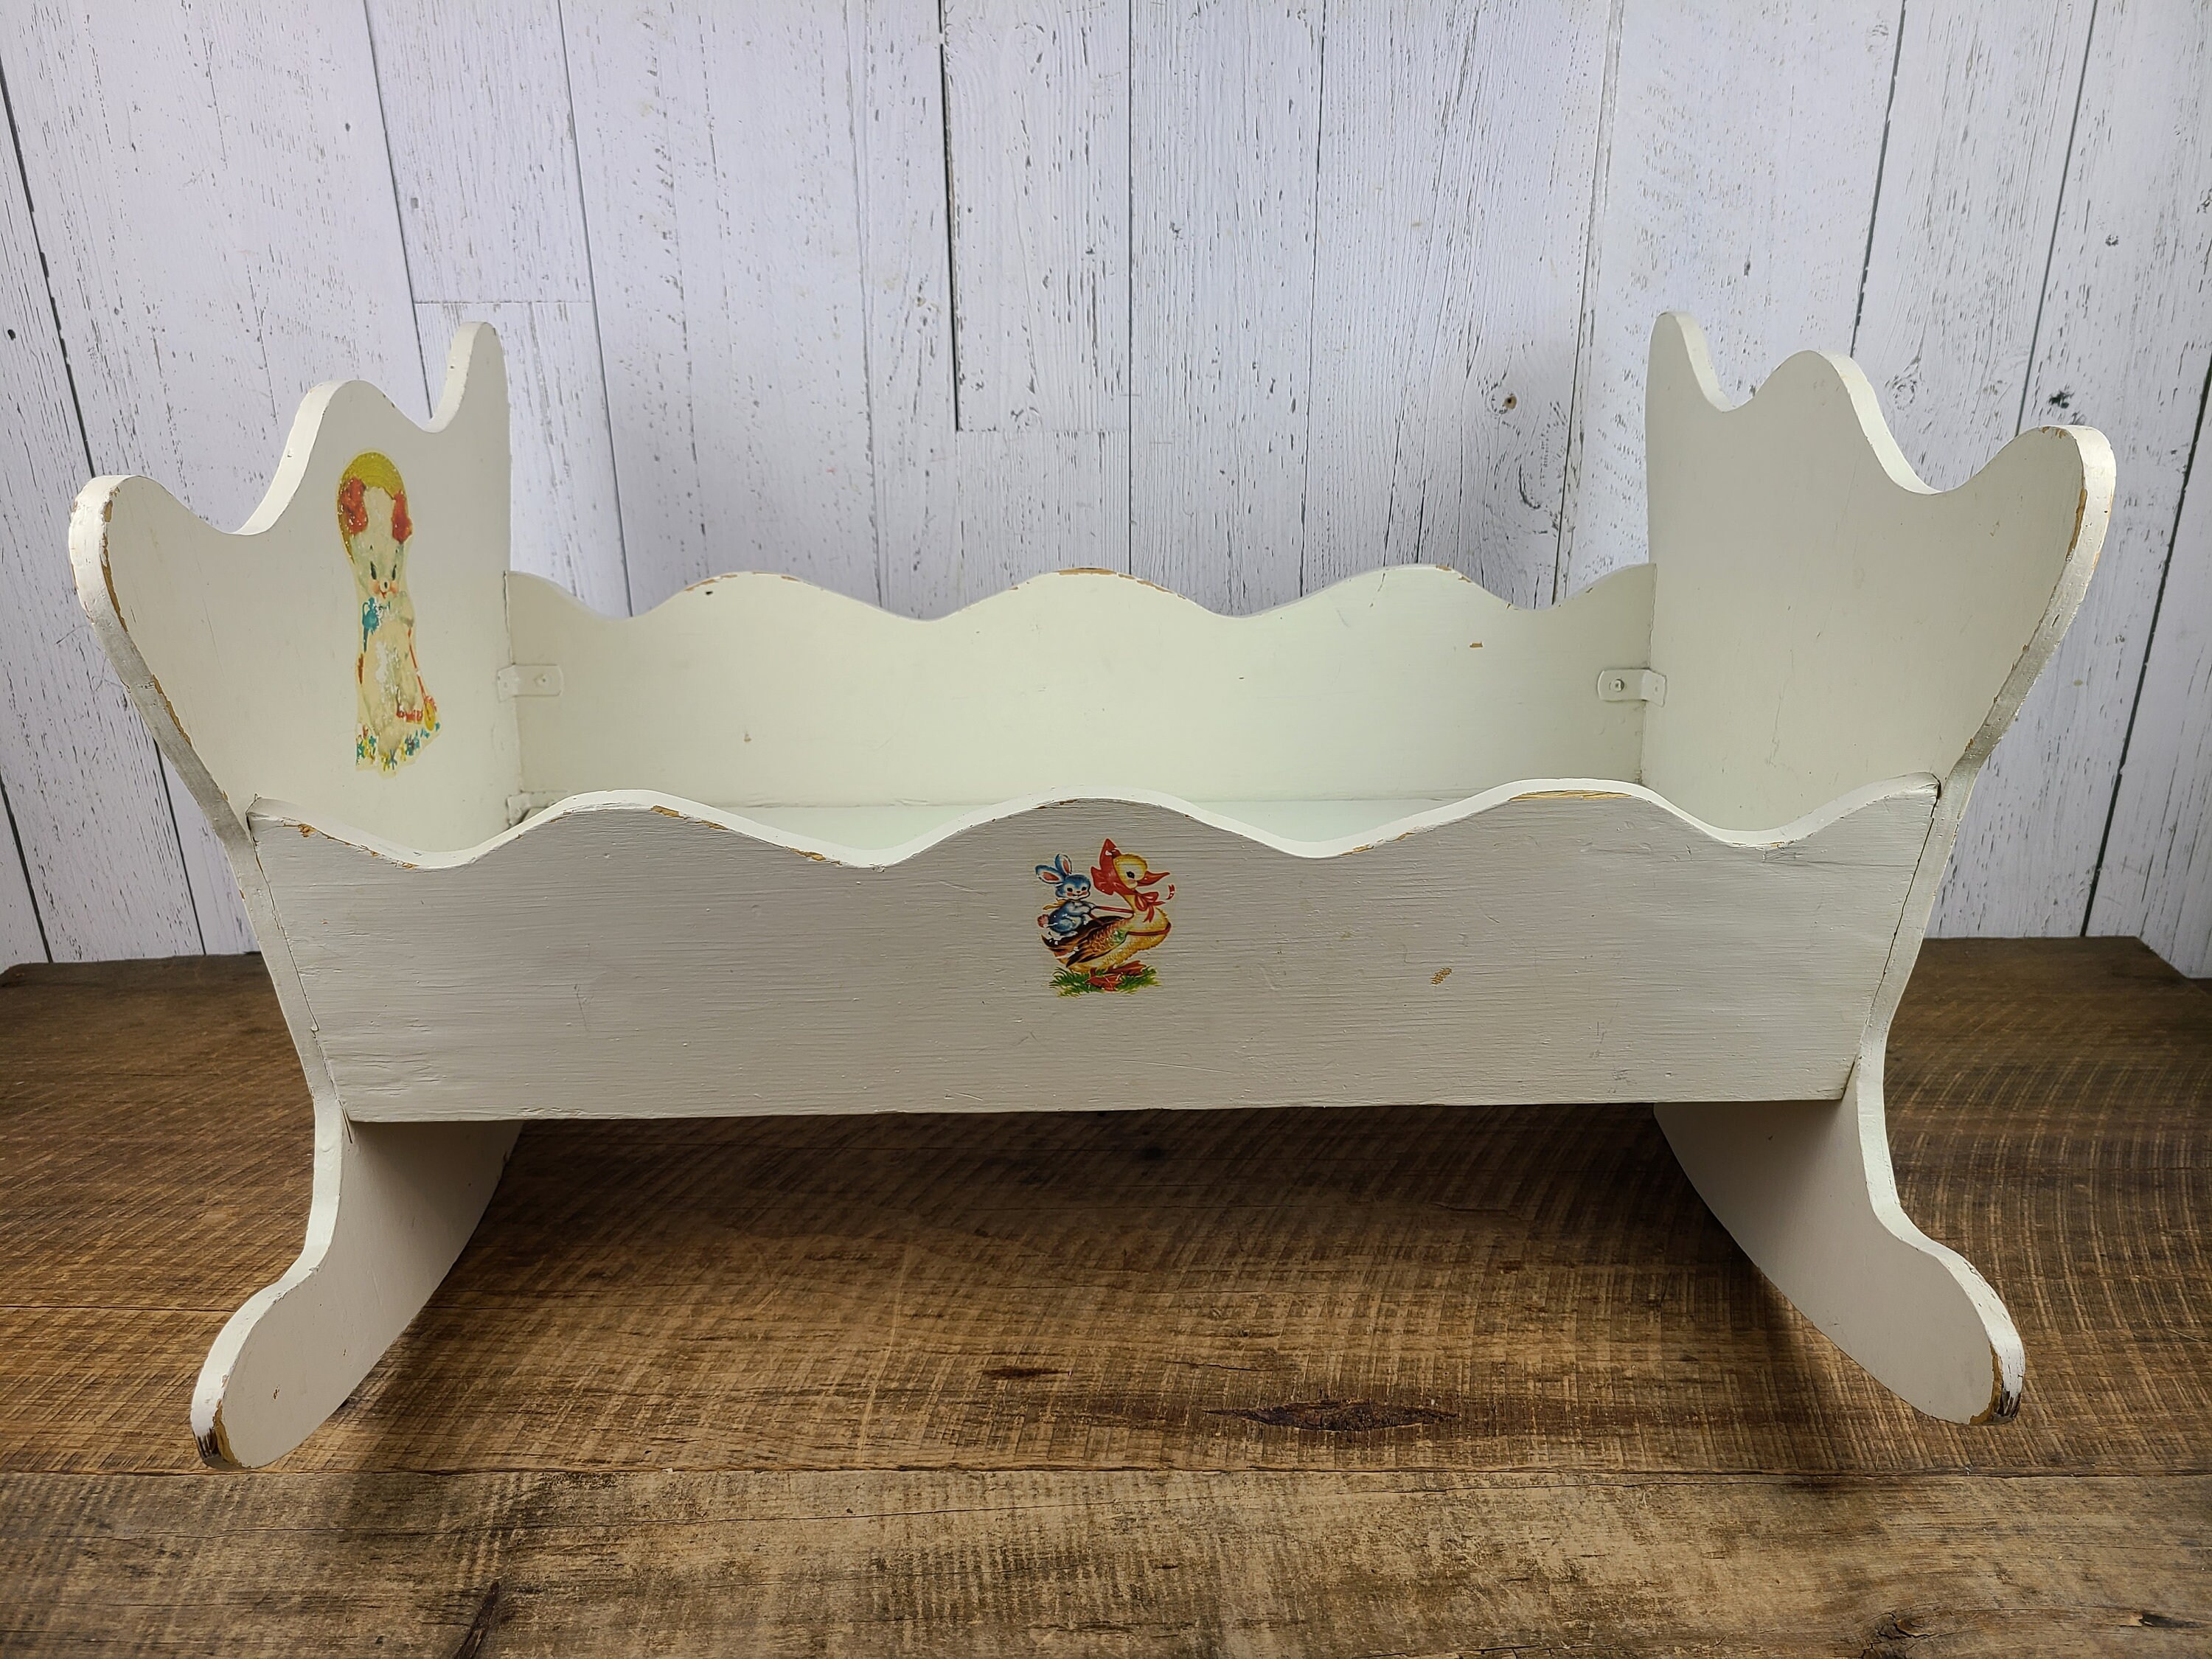 Vintage Baby Cradle Wood Rocking Child Furniture Wooden Cottage Chic  Farmhouse Nursery Decor Decorative Retro Prop Gift for Favorite Doll -   Finland